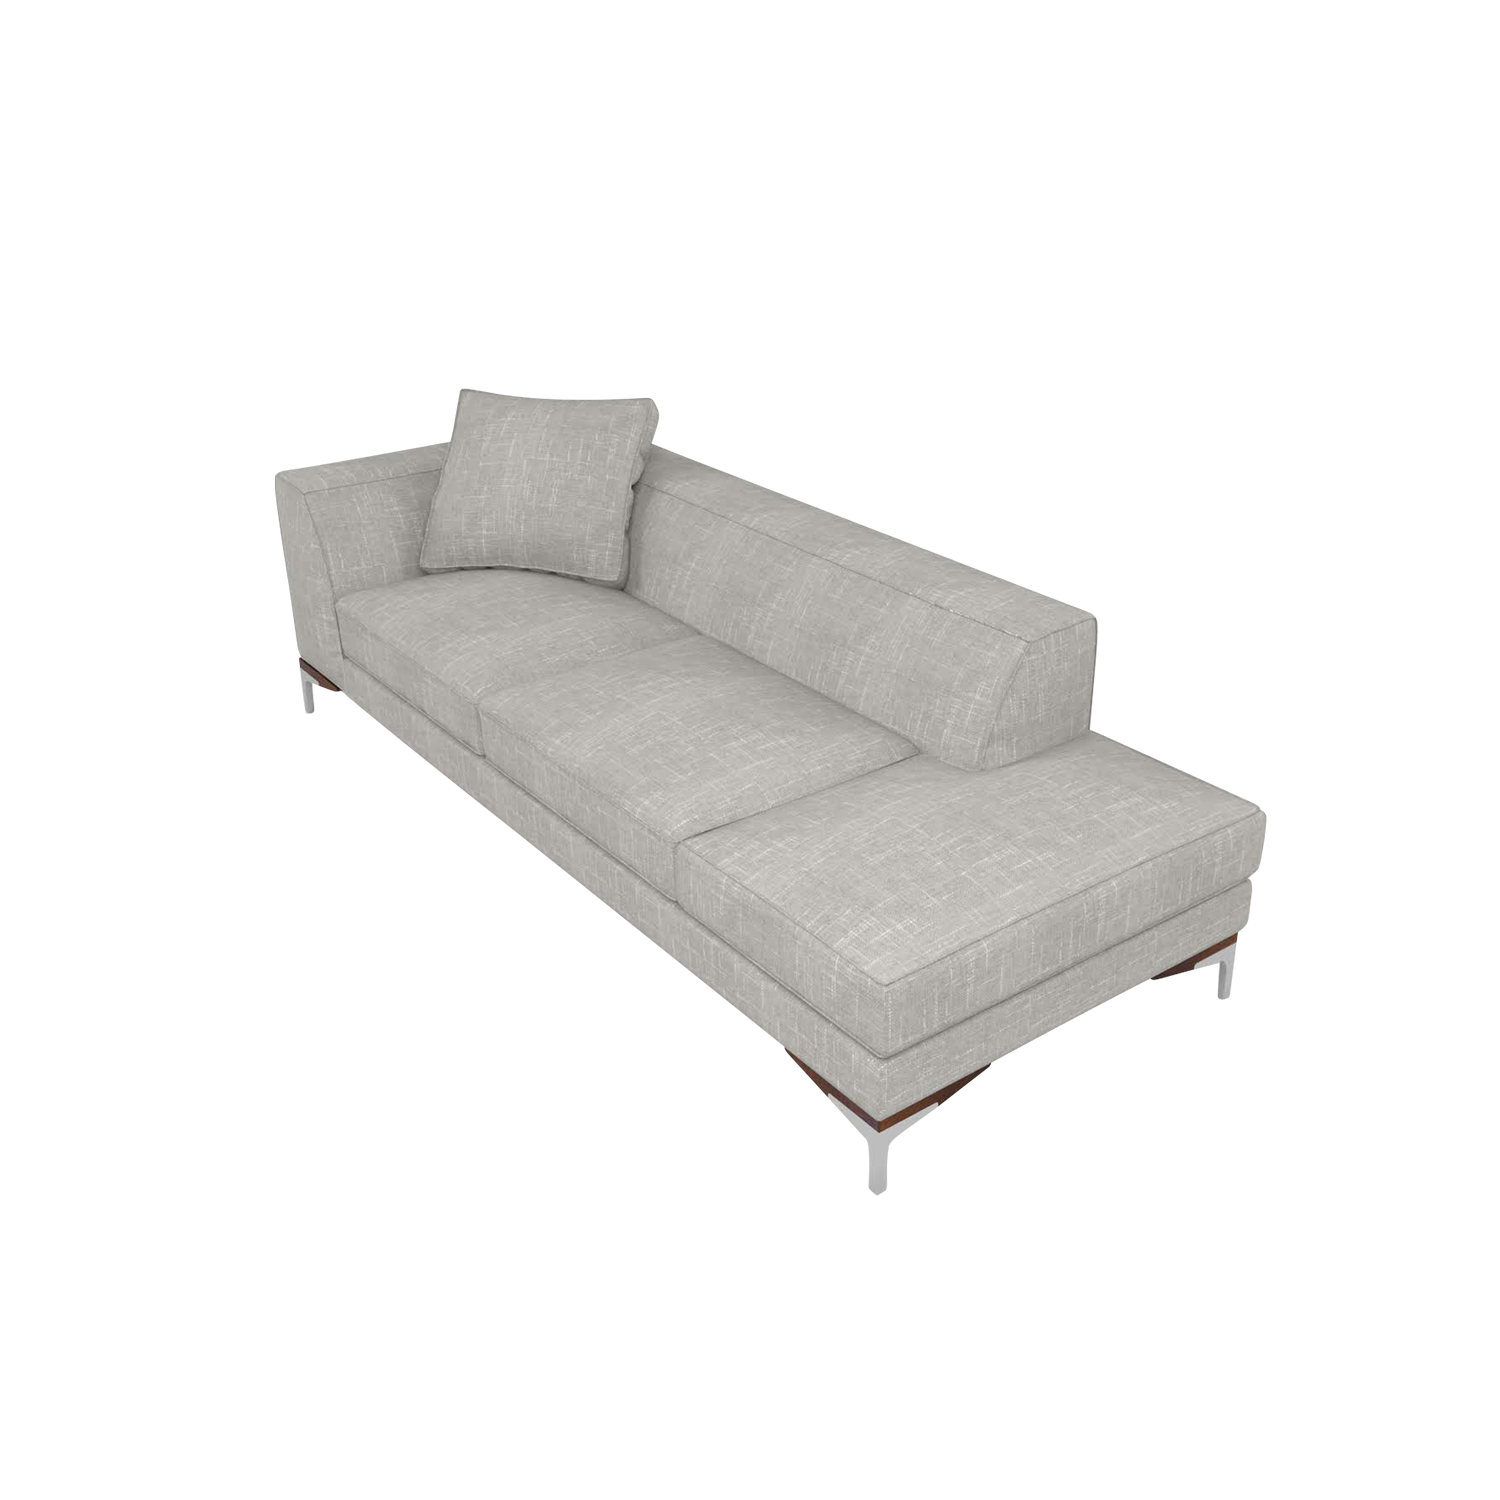 Tribecca Bumper Chaise | Nathan Anthony | Sofas | tribeca-bumper-chaise